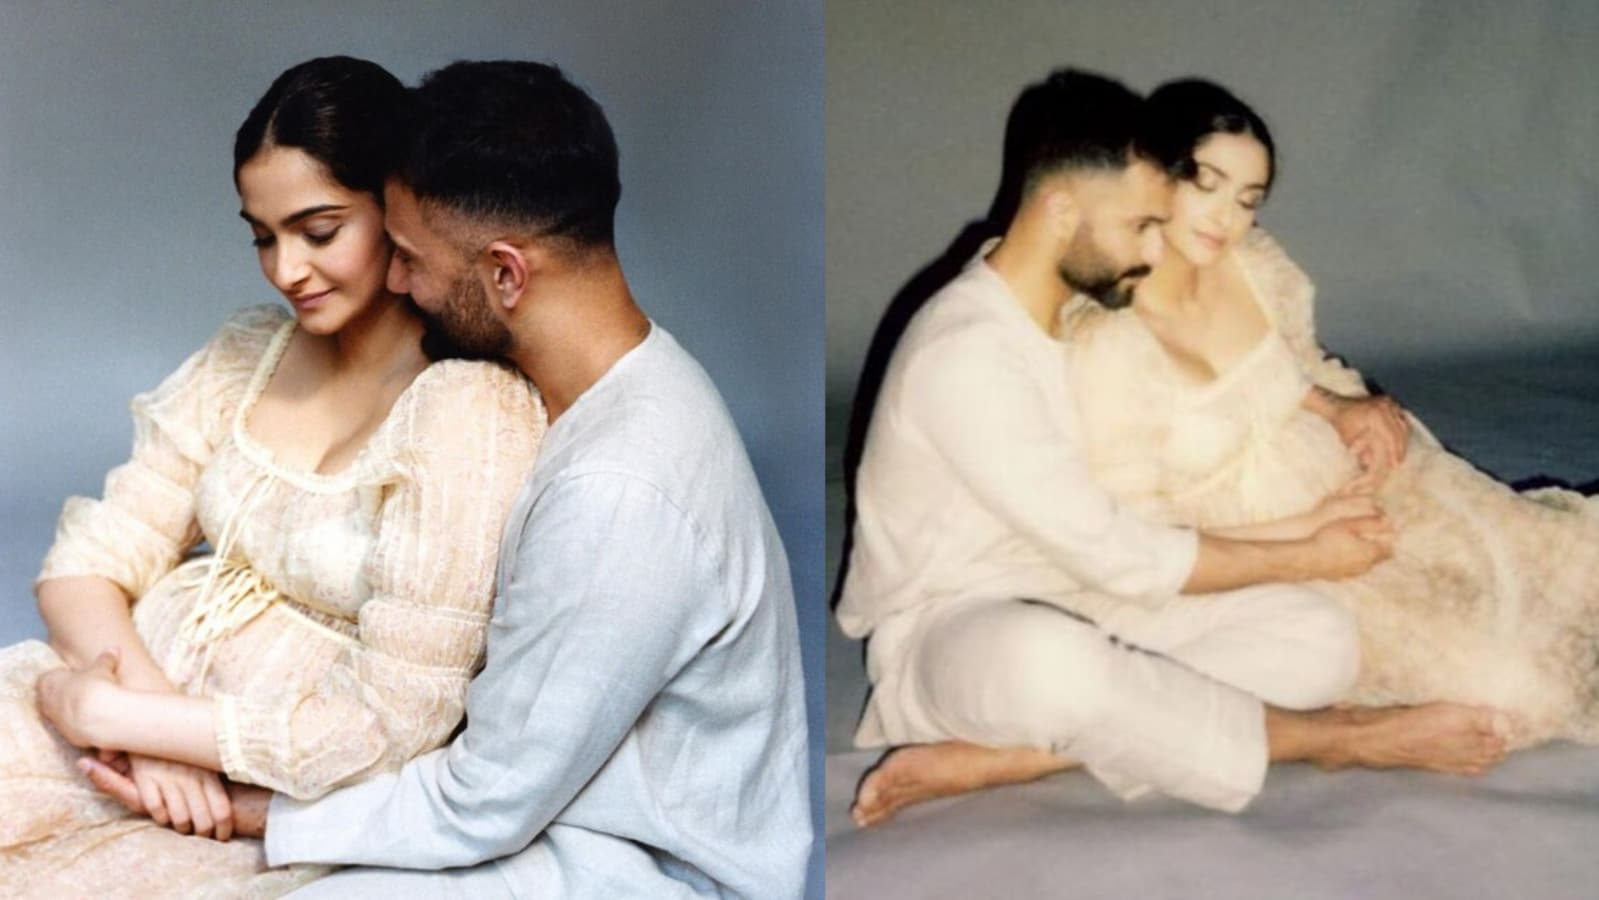 Pregnant Sonam Kapoor shares ‘dreamy’ snaps with Anand Ahuja, fans call them ‘most beautiful couple’. See pics